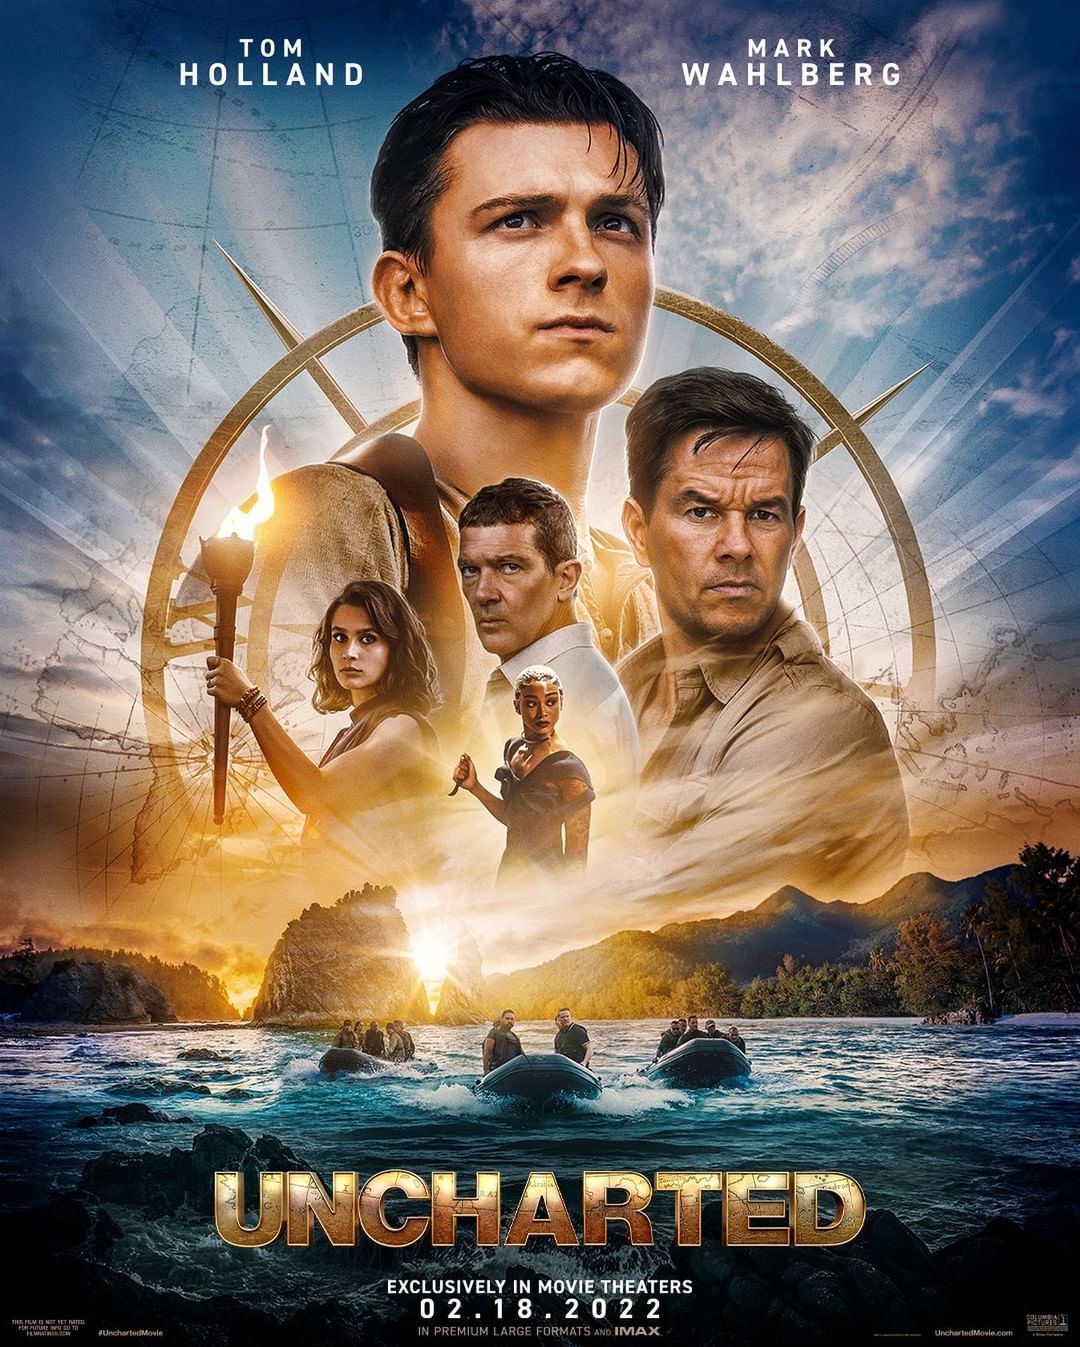 Uncharted (2022 film)